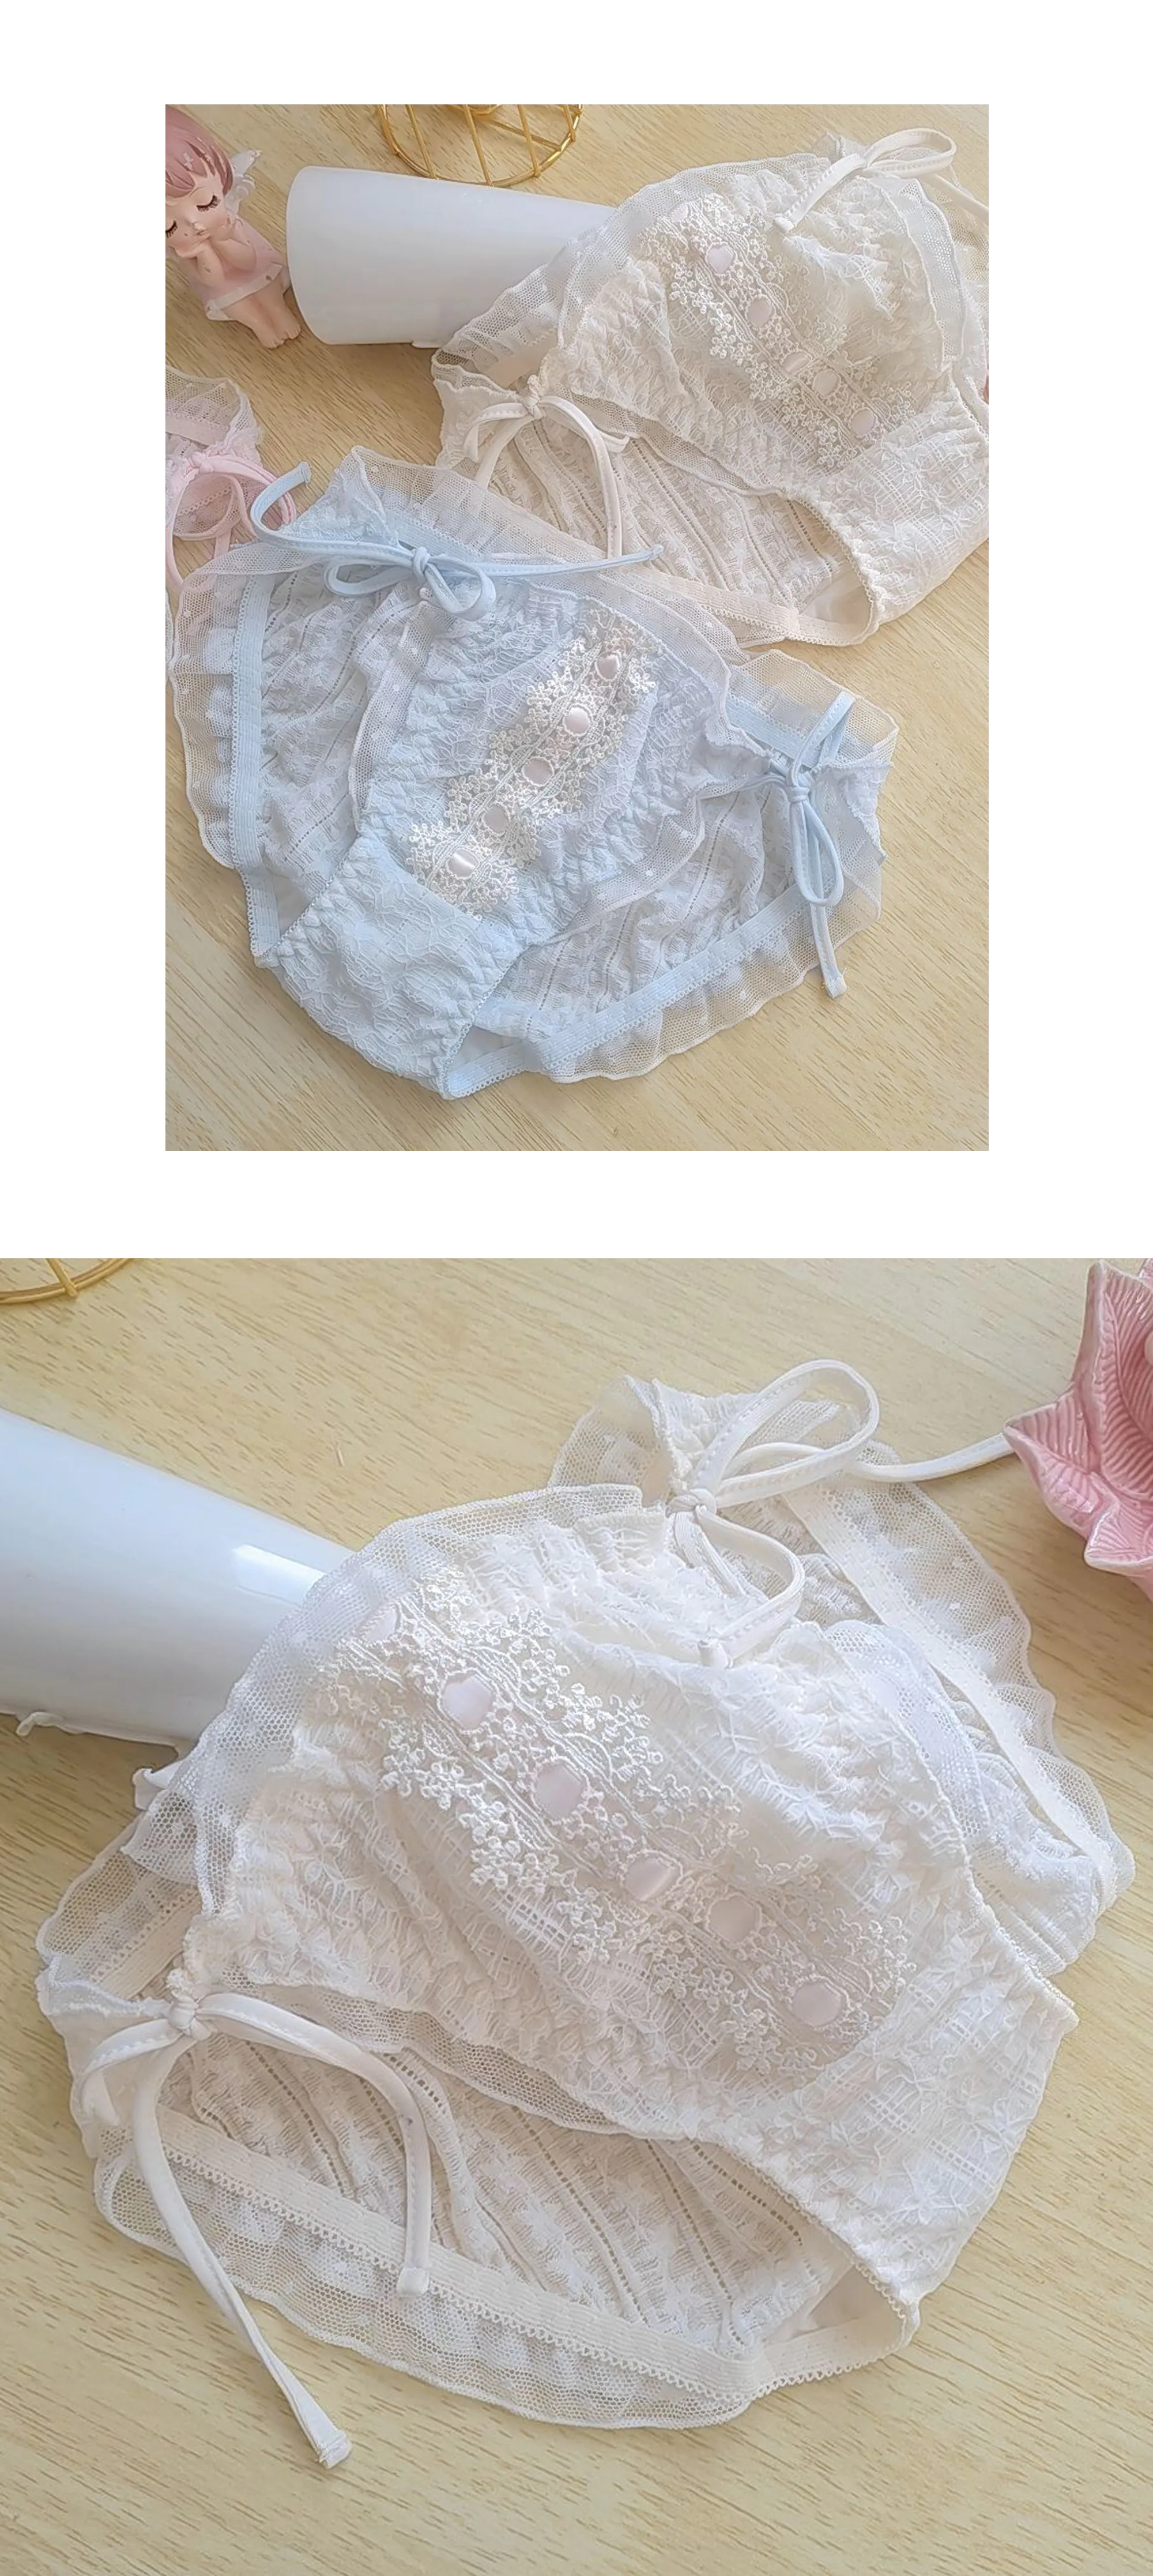 Ladies-Soft-Breathable-Low-Waist-Bow-Tie-Lace-Panties-Underwear12